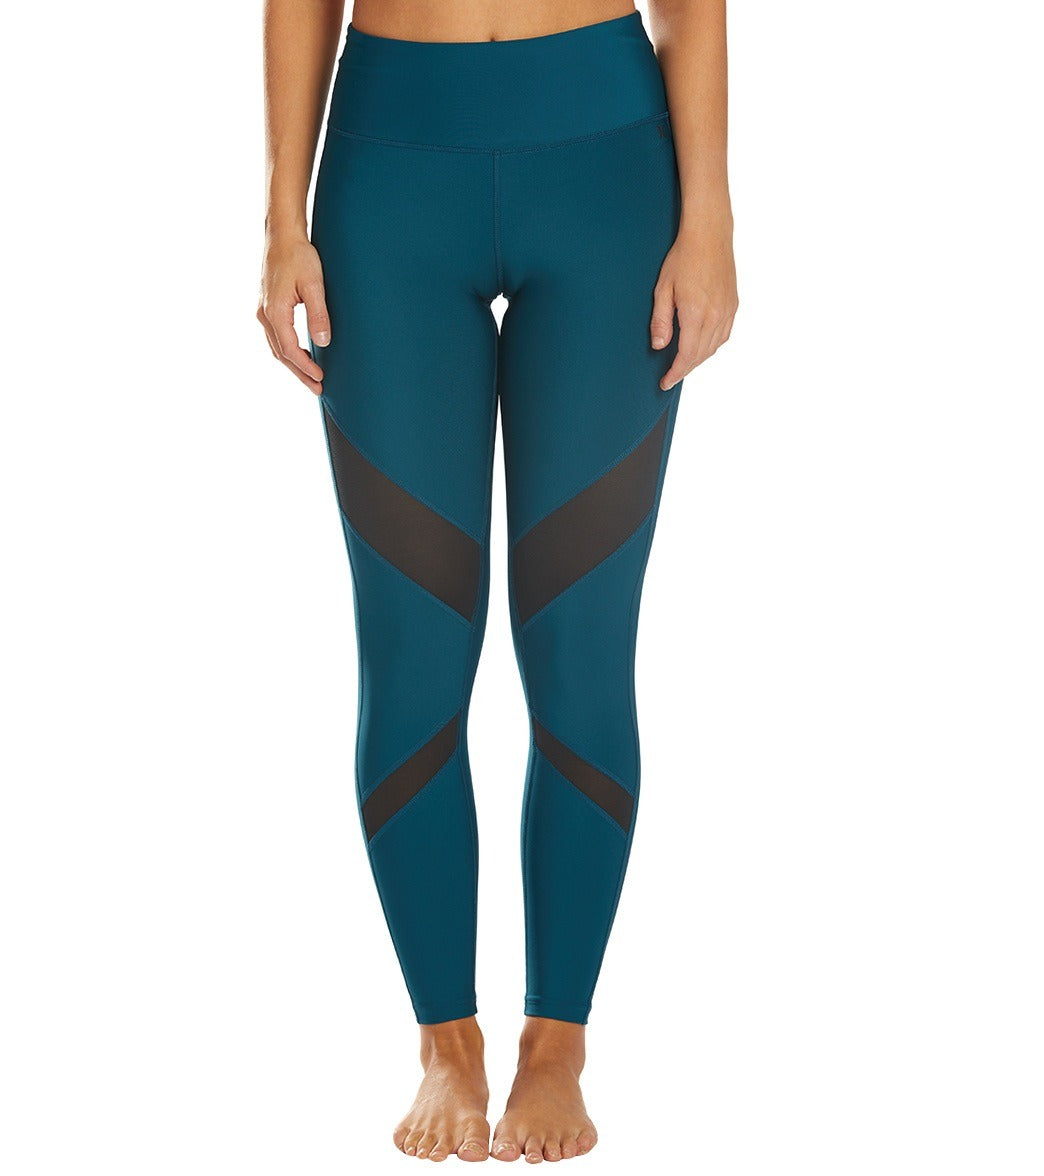 Hurley Quick Dry Mesh Surf Legging at SwimOutlet.com